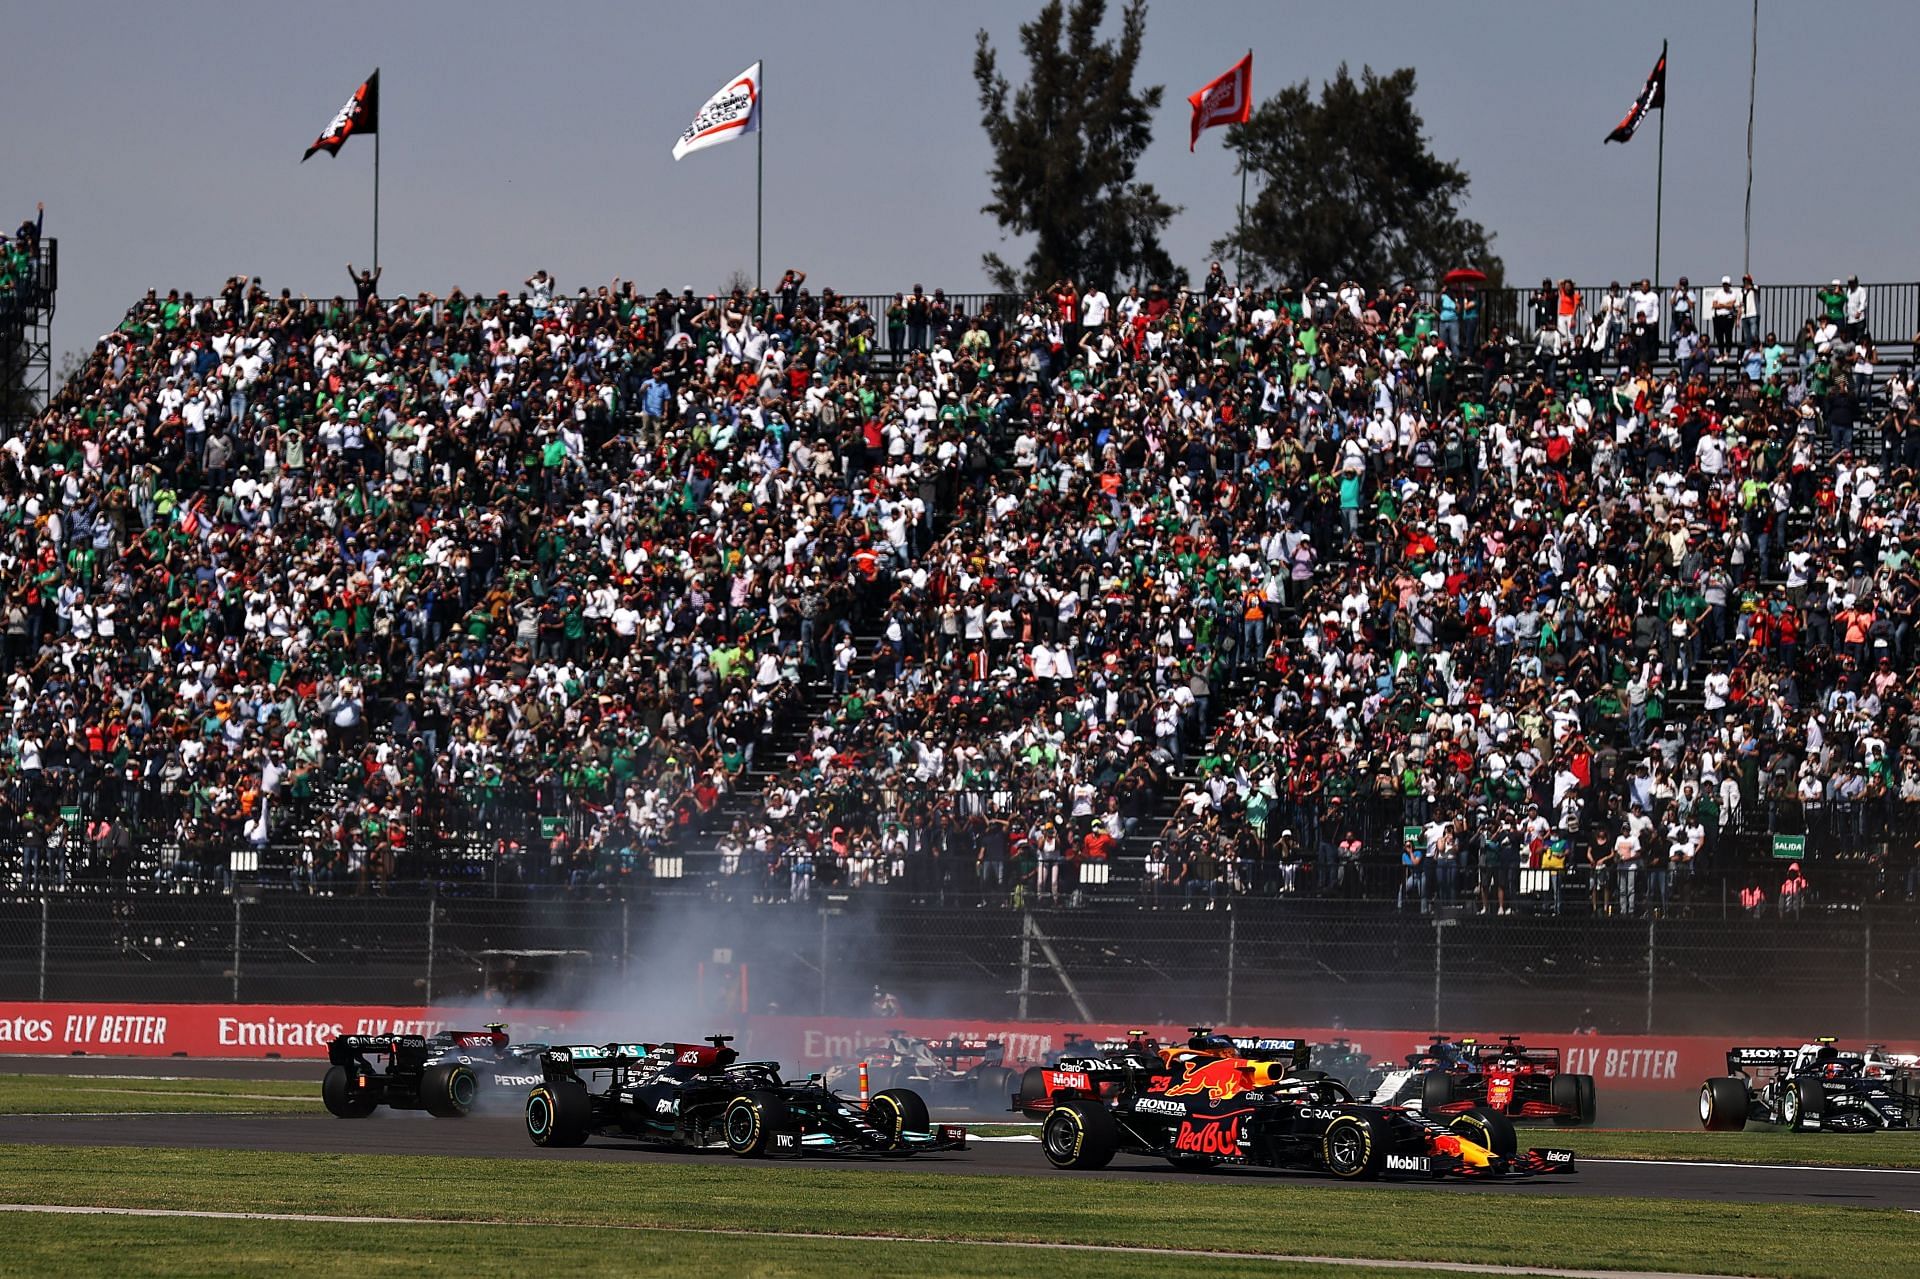 Max Verstappen leads Lewis Hamilton and the rest of the field at the start during the 2021 Mexican GP. (Photo by Lars Baron/Getty Images)